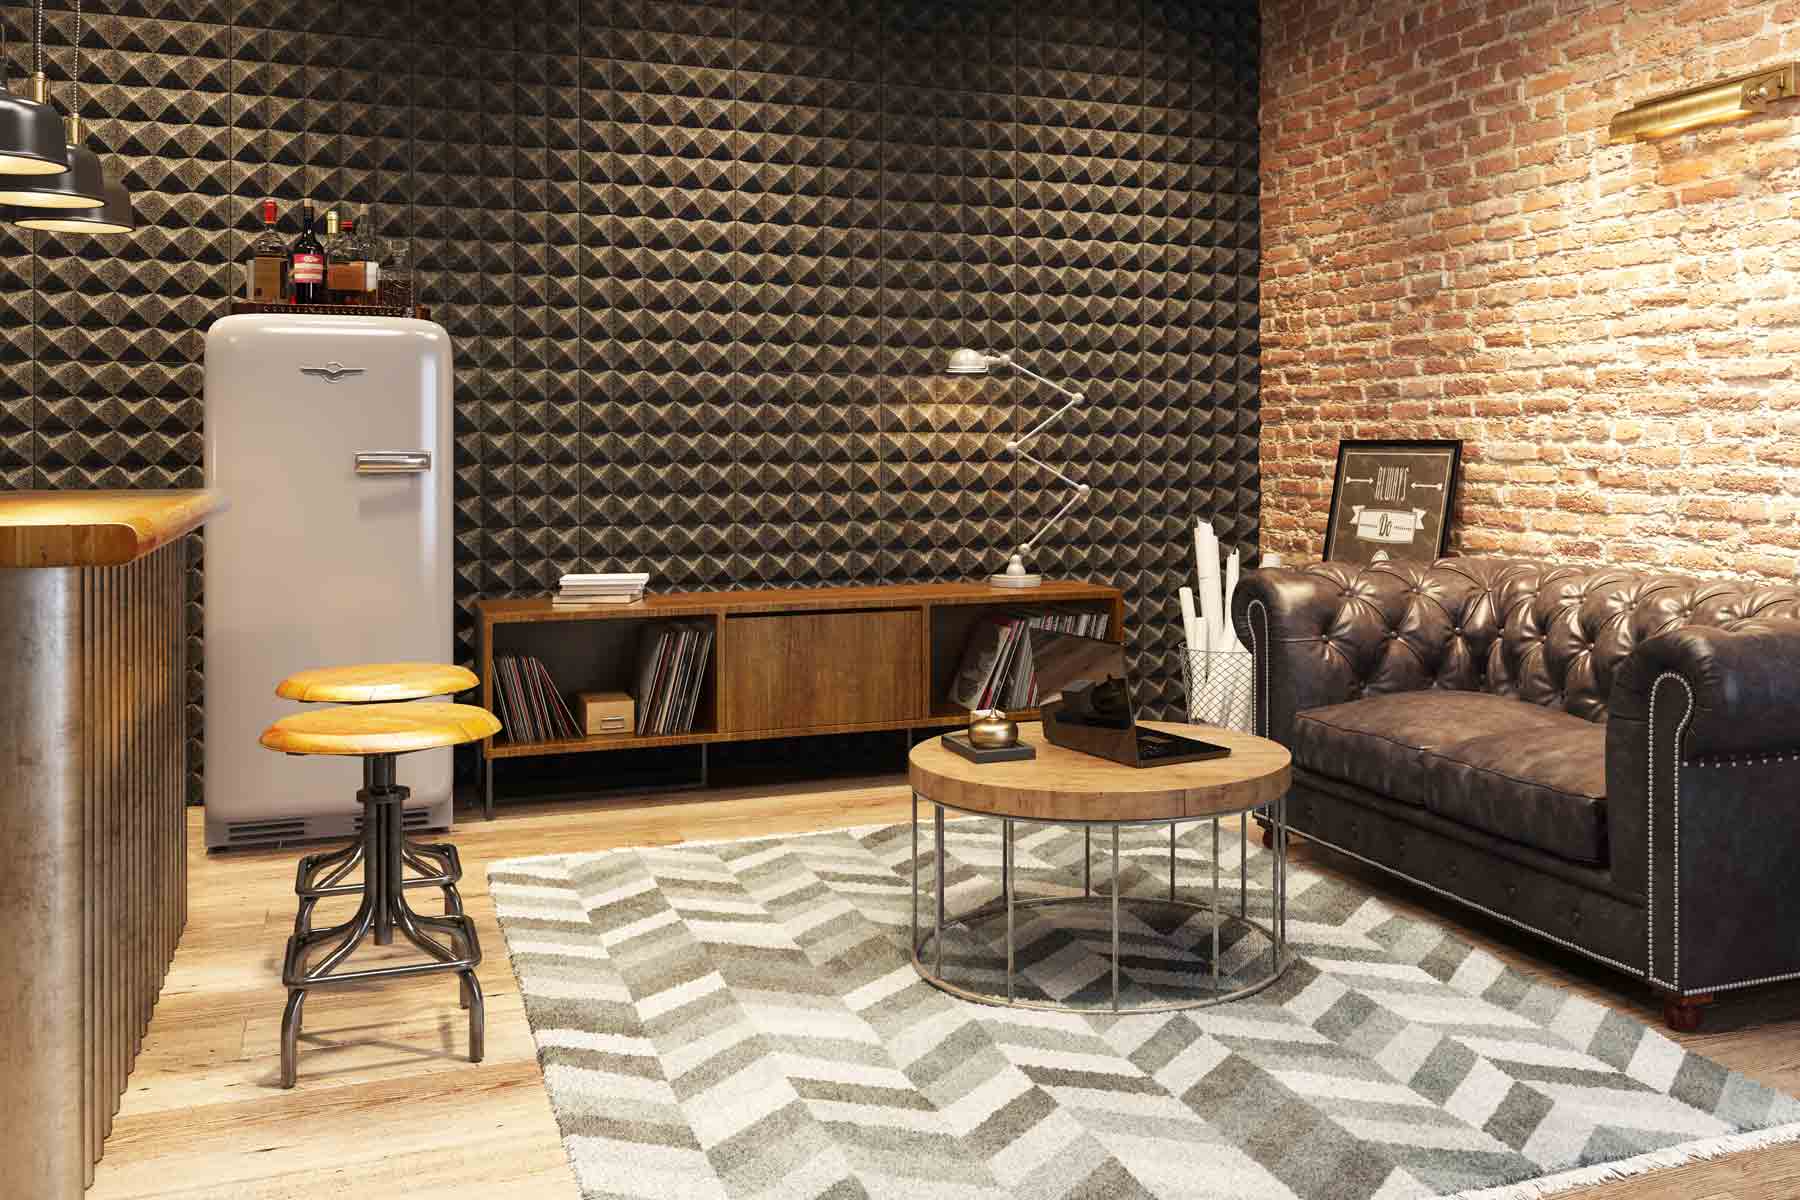 Soundproofing Material Review: The Best Options for Noise Reduction